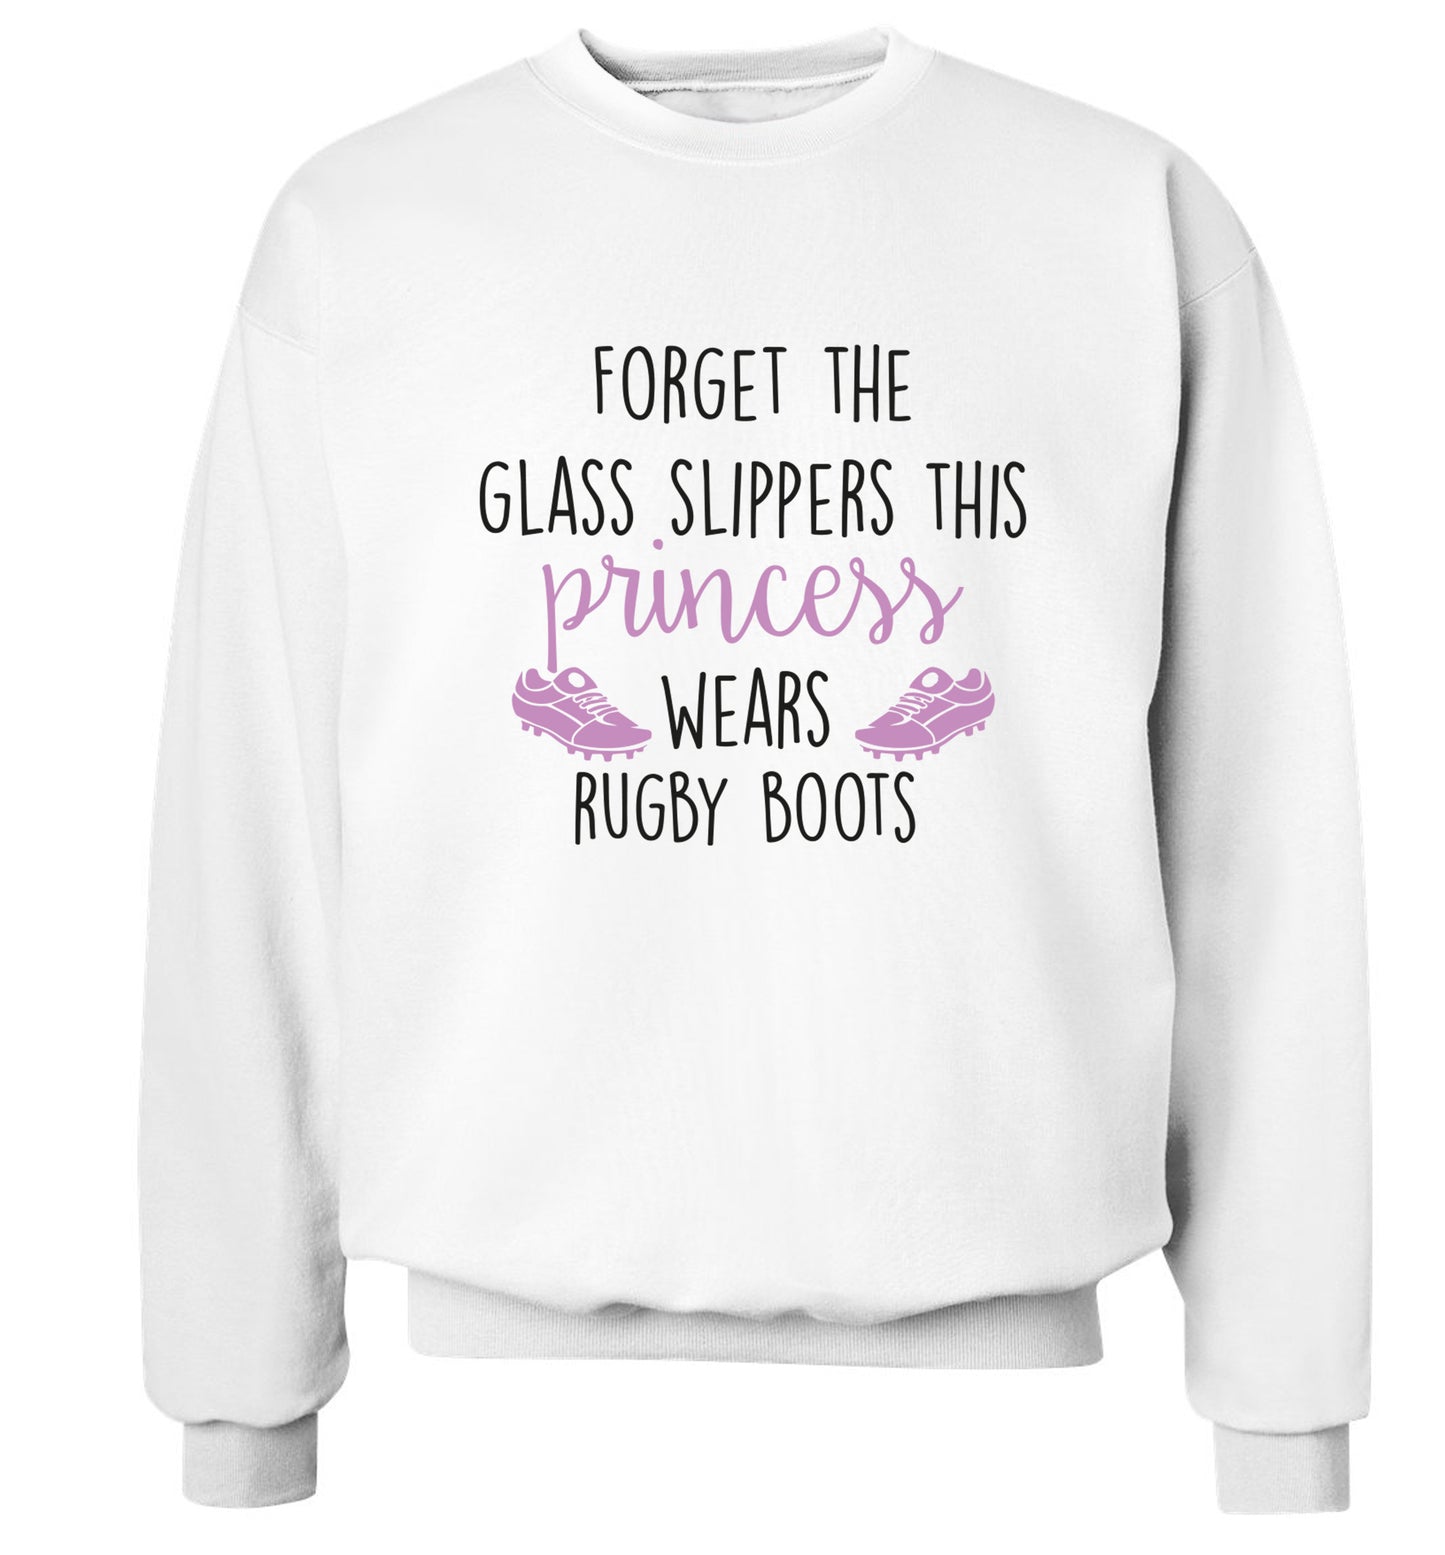 Forget the glass slippers this princess wears rugby boots Adult's unisex white Sweater 2XL